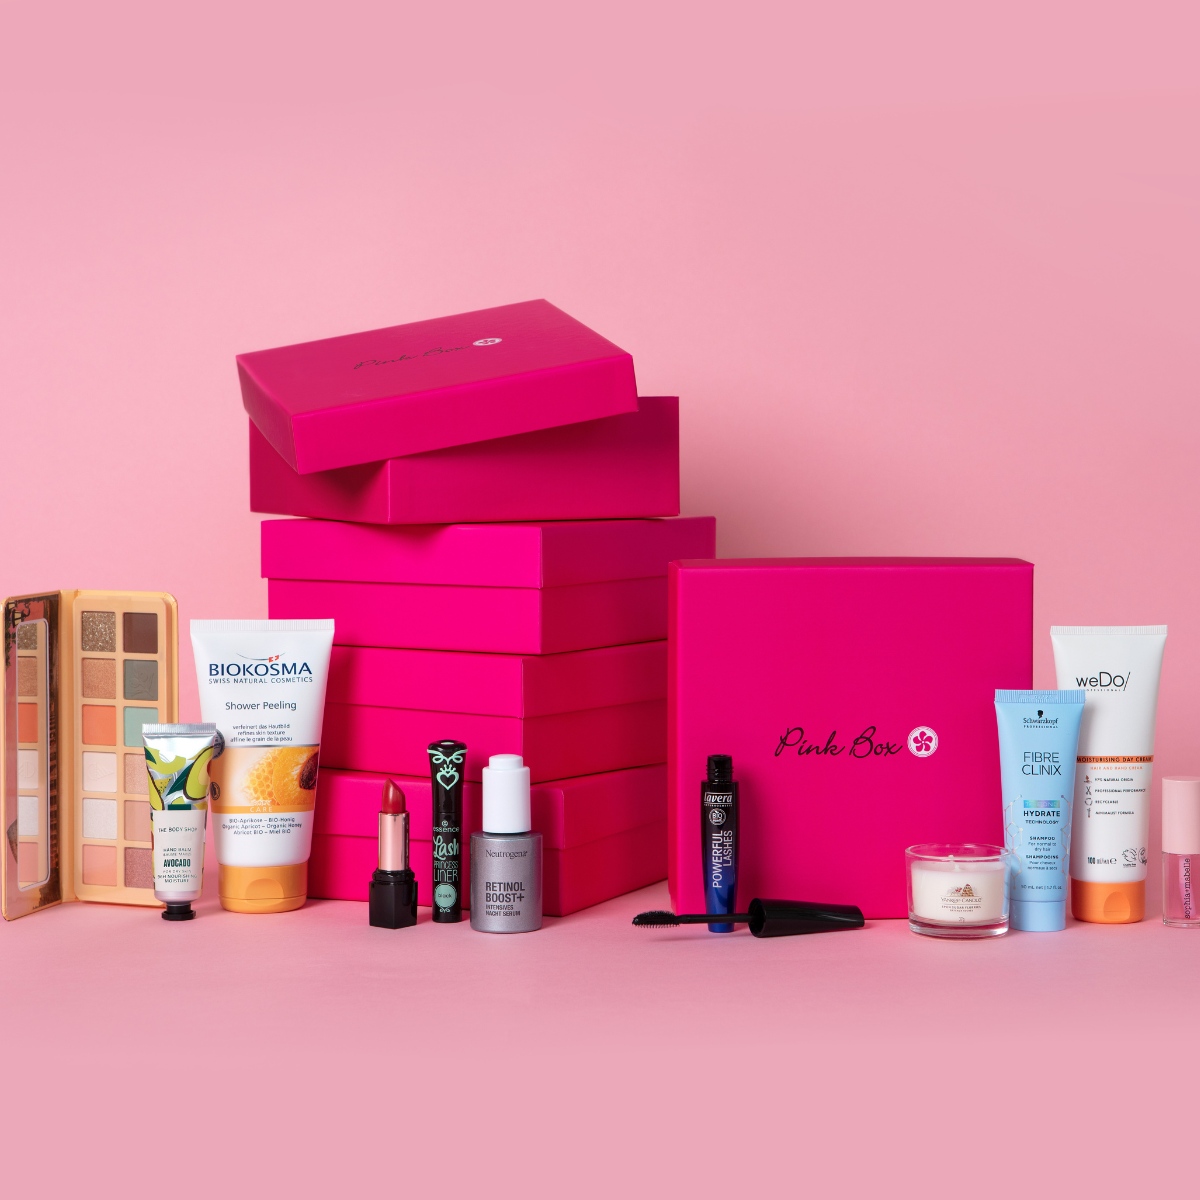 How to Apply for AfterPay – The Pink Makeup Box